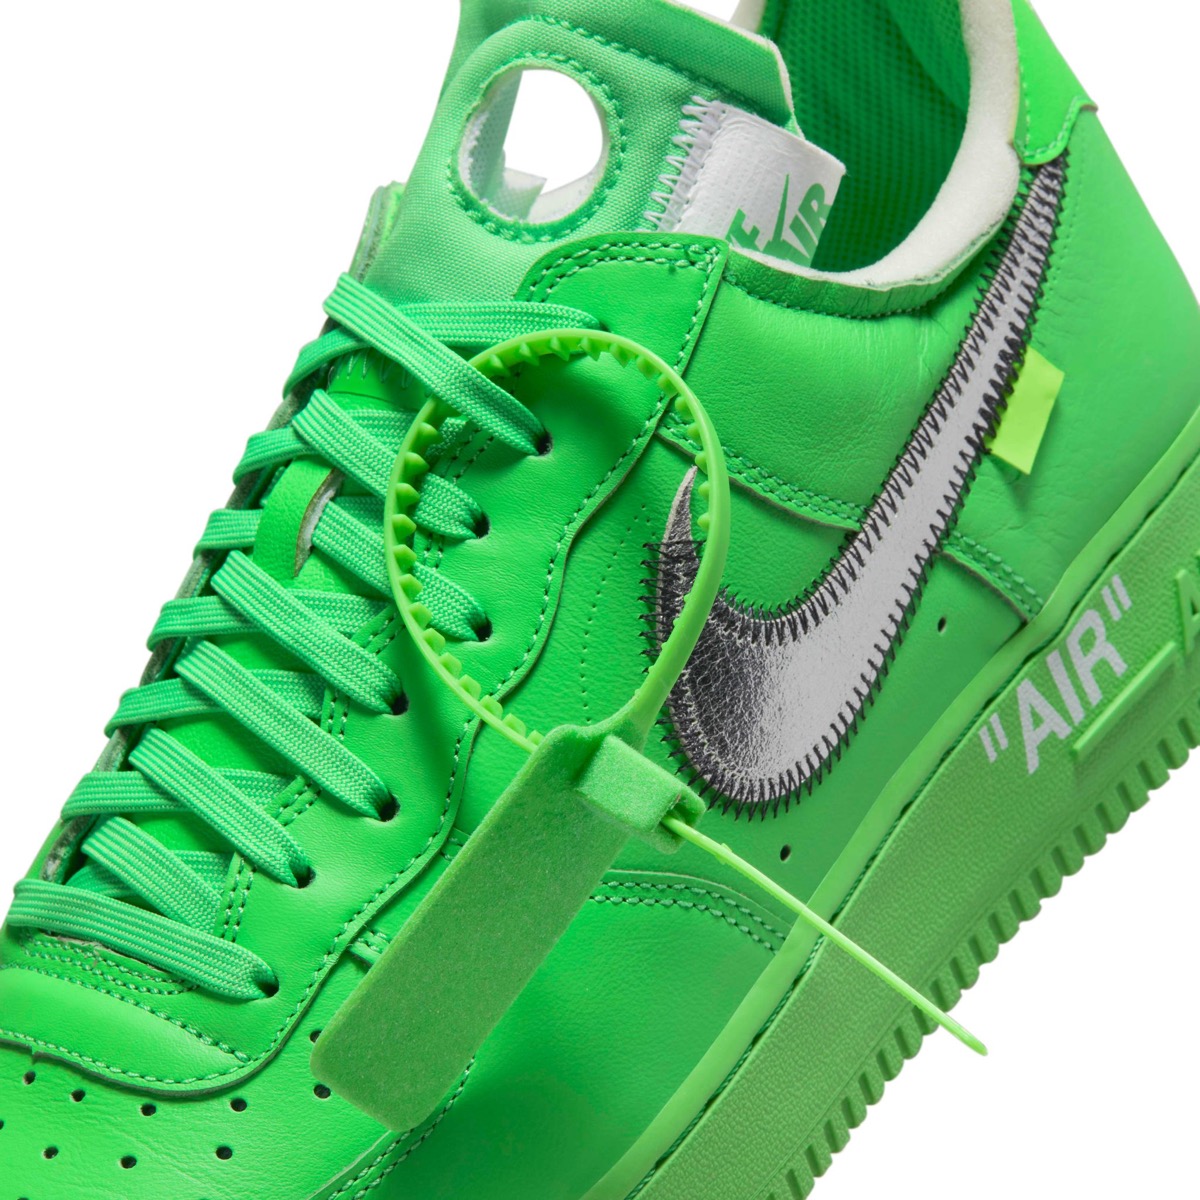 Off-White™ × Nike Air Force 1 Low “Brooklyn”が登場 | UP TO DATE